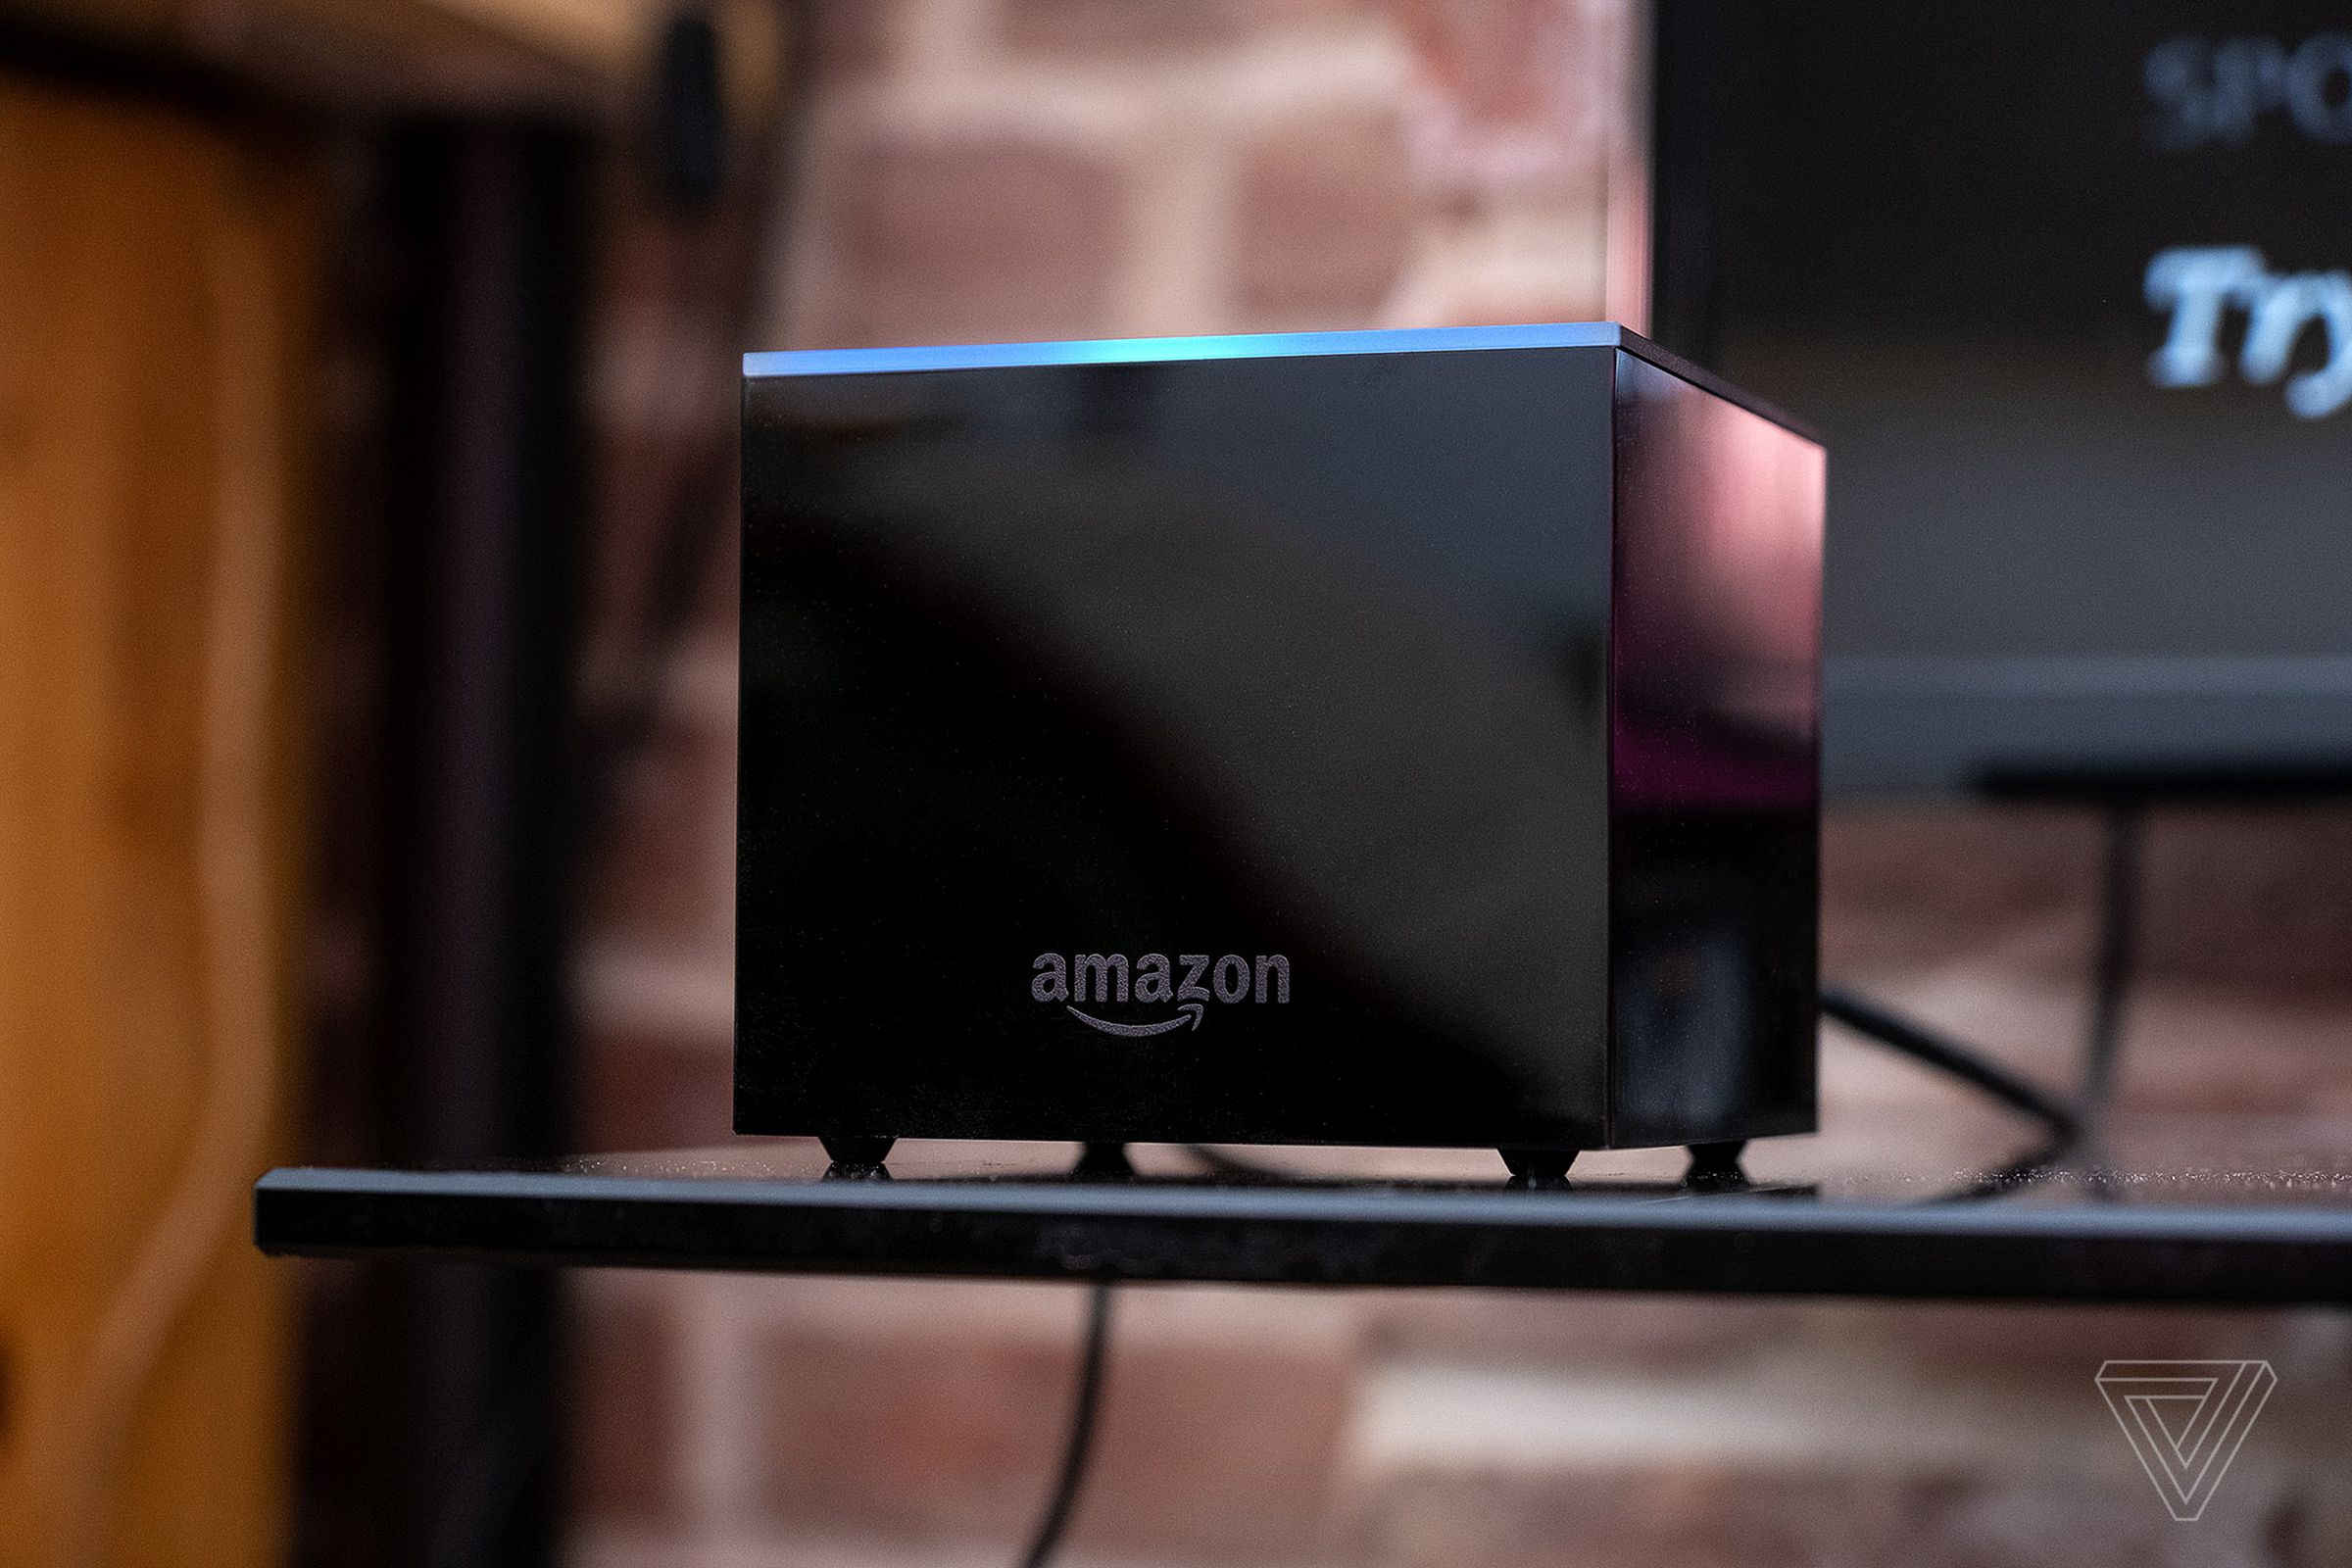 Amazon’s Fire TV Cube, the best streaming player if you don’t have a smart speaker, pictured on a TV stand.